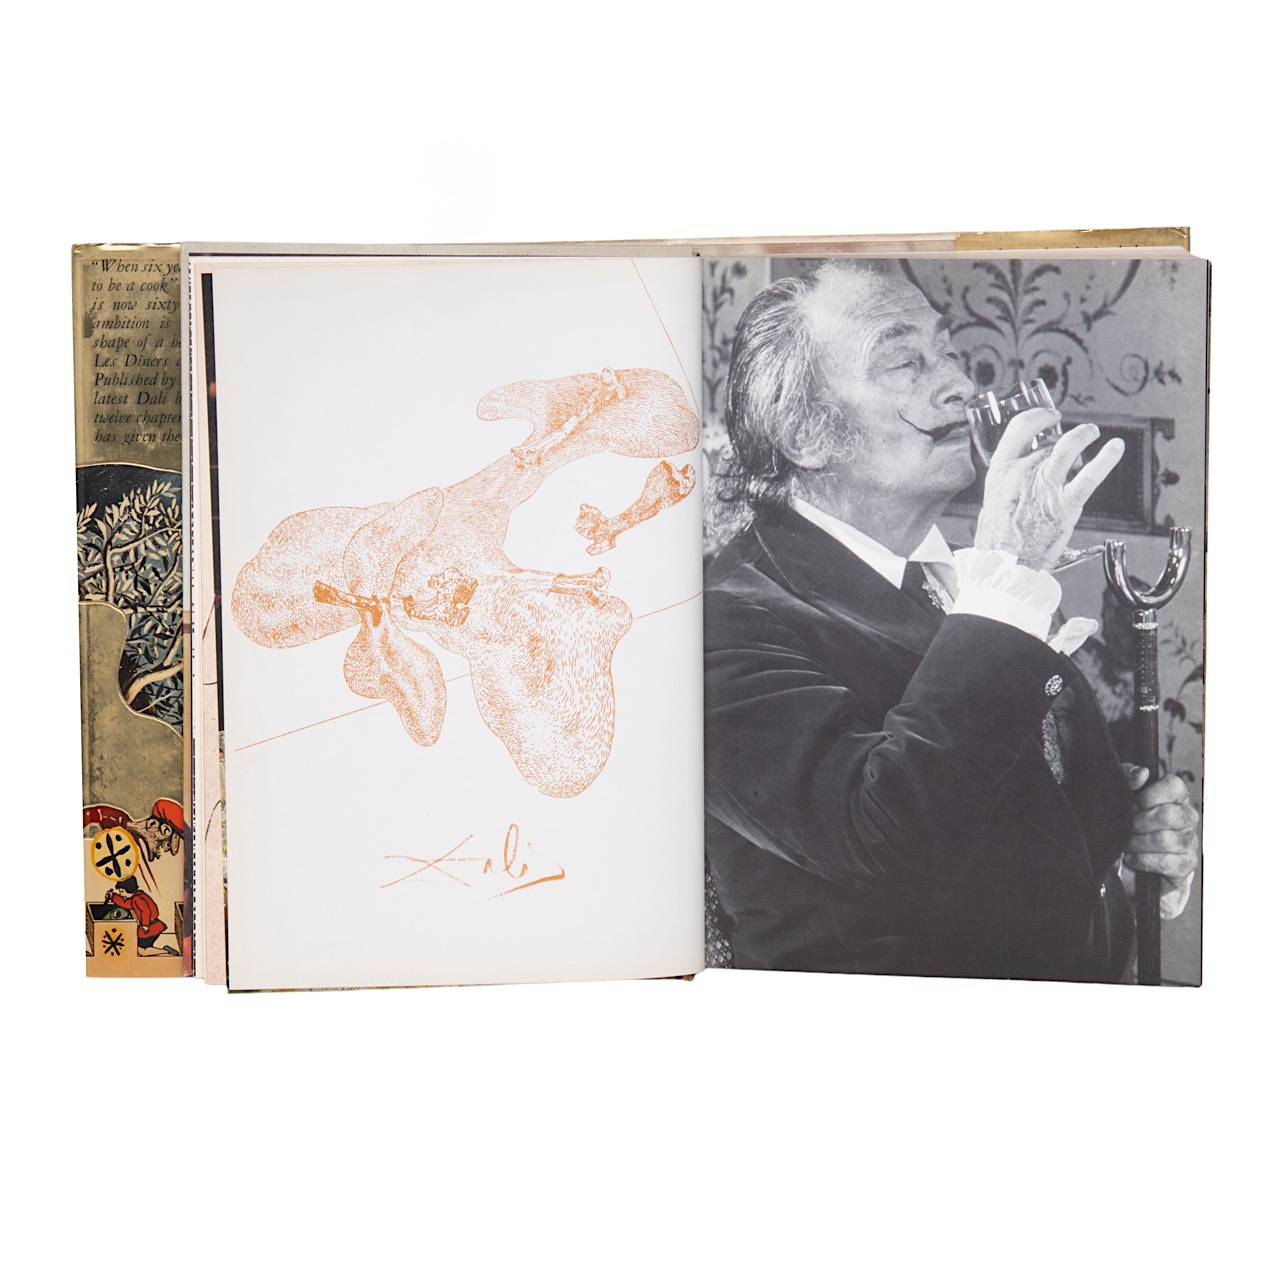 Two gastronomical books by Salvador Dali (1904-1989), 'Les Diners de Gala' and 'The Wines of Gala' - Image 4 of 9